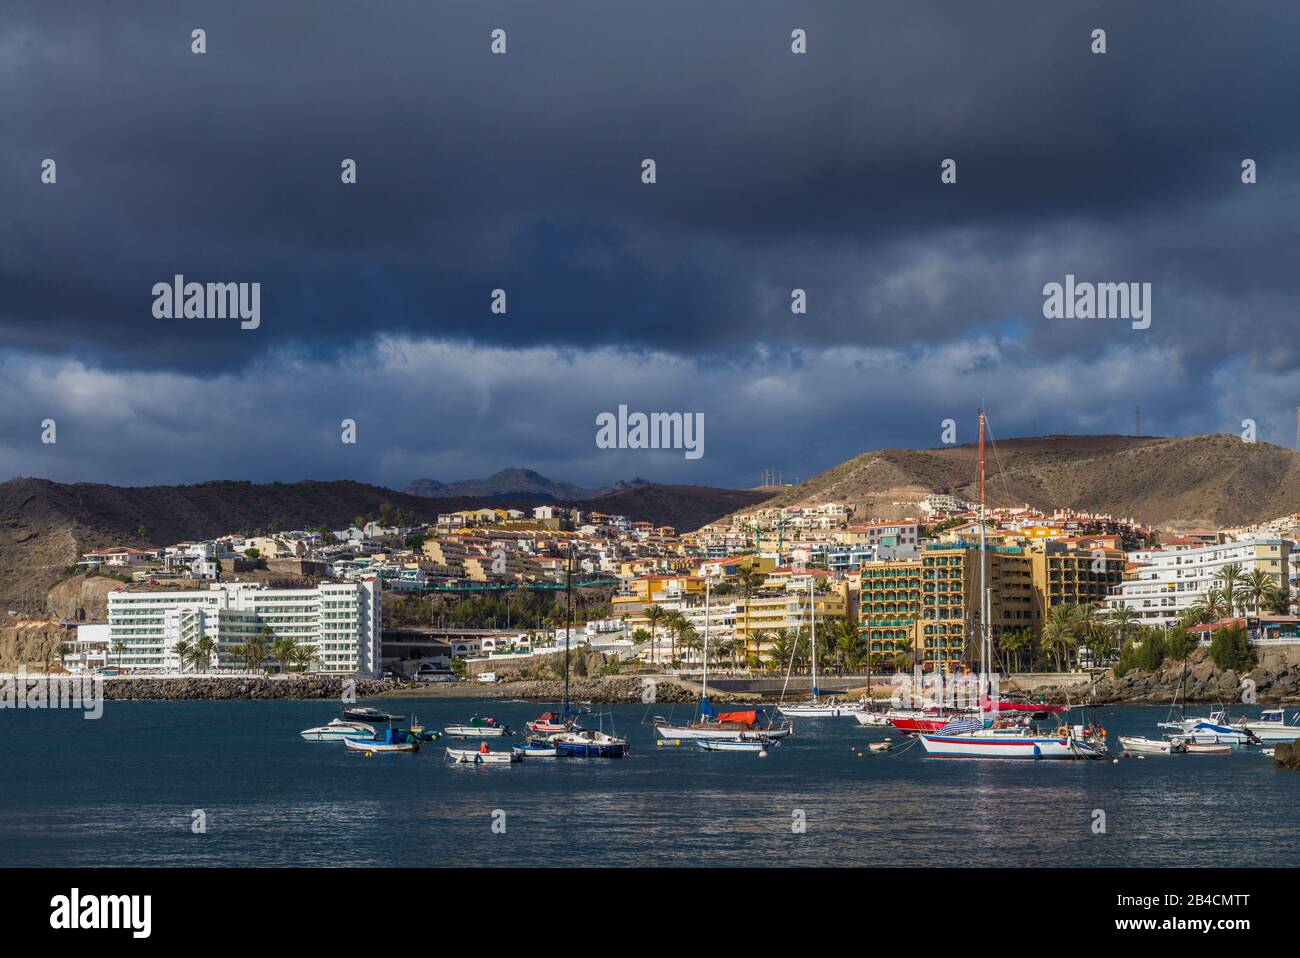 Spain, Canary Islands, Gran Canaria Island, Arguineguin, resort town view Stock Photo